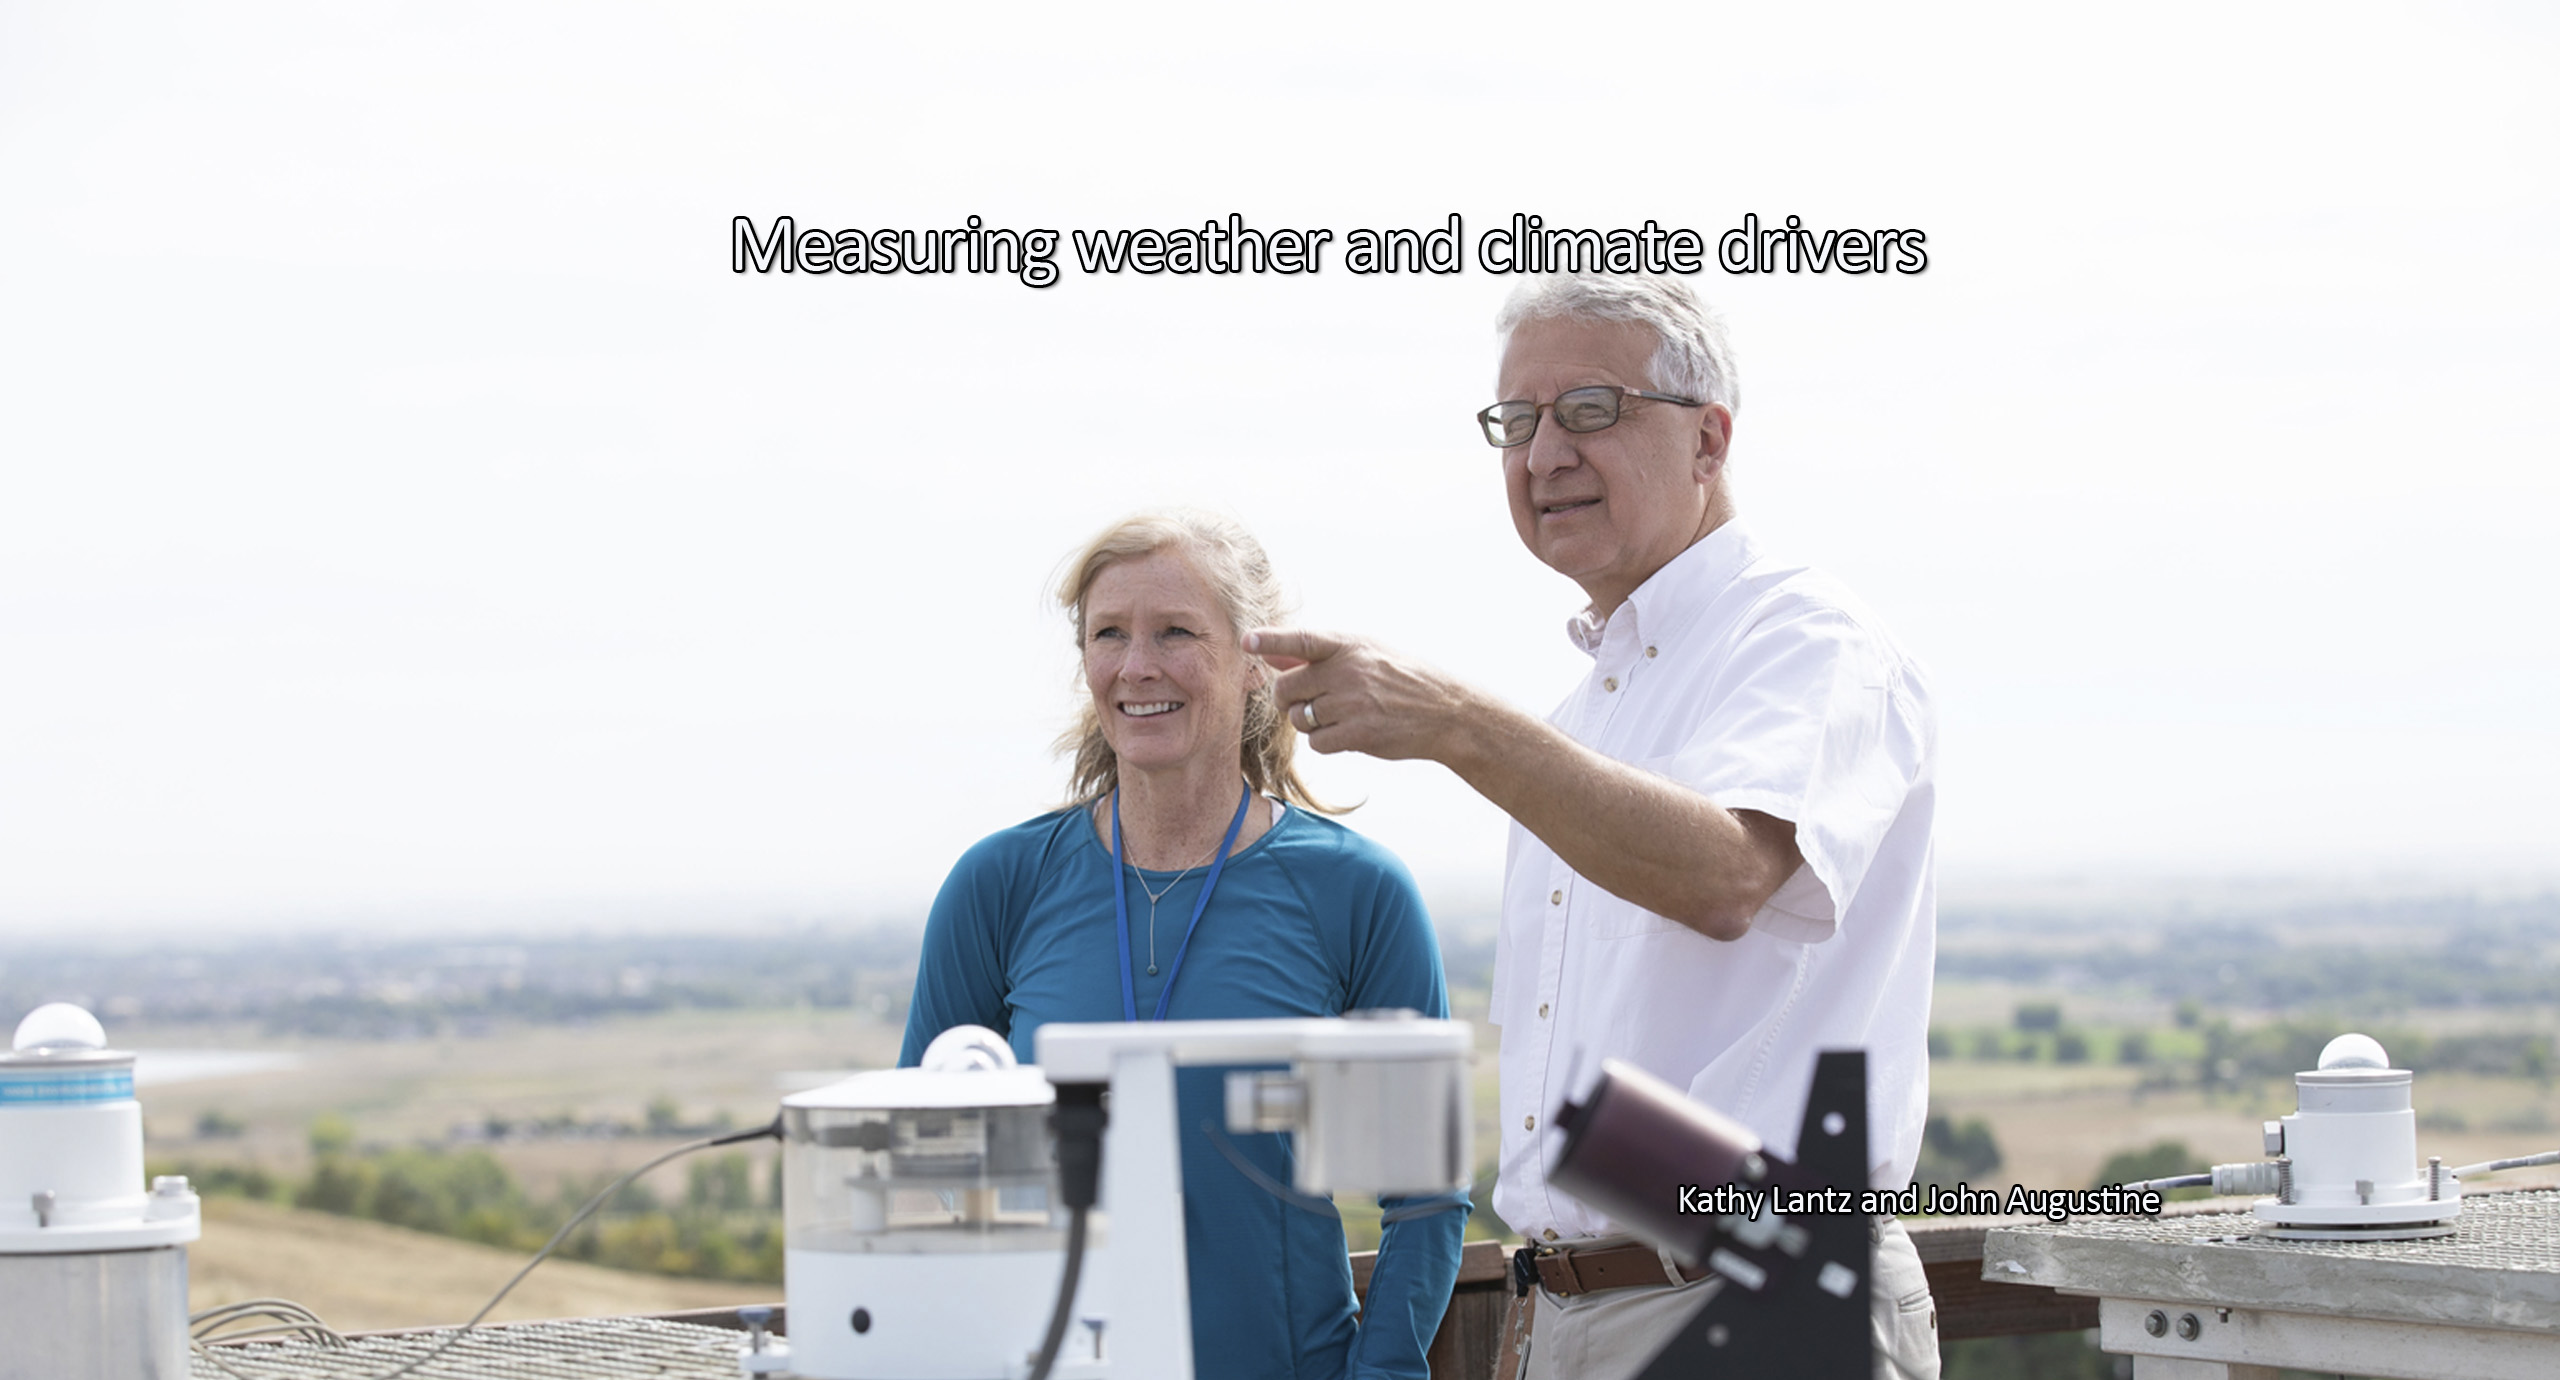 Measuring weather and climate drivers - Kathy Lantz and John Augustine